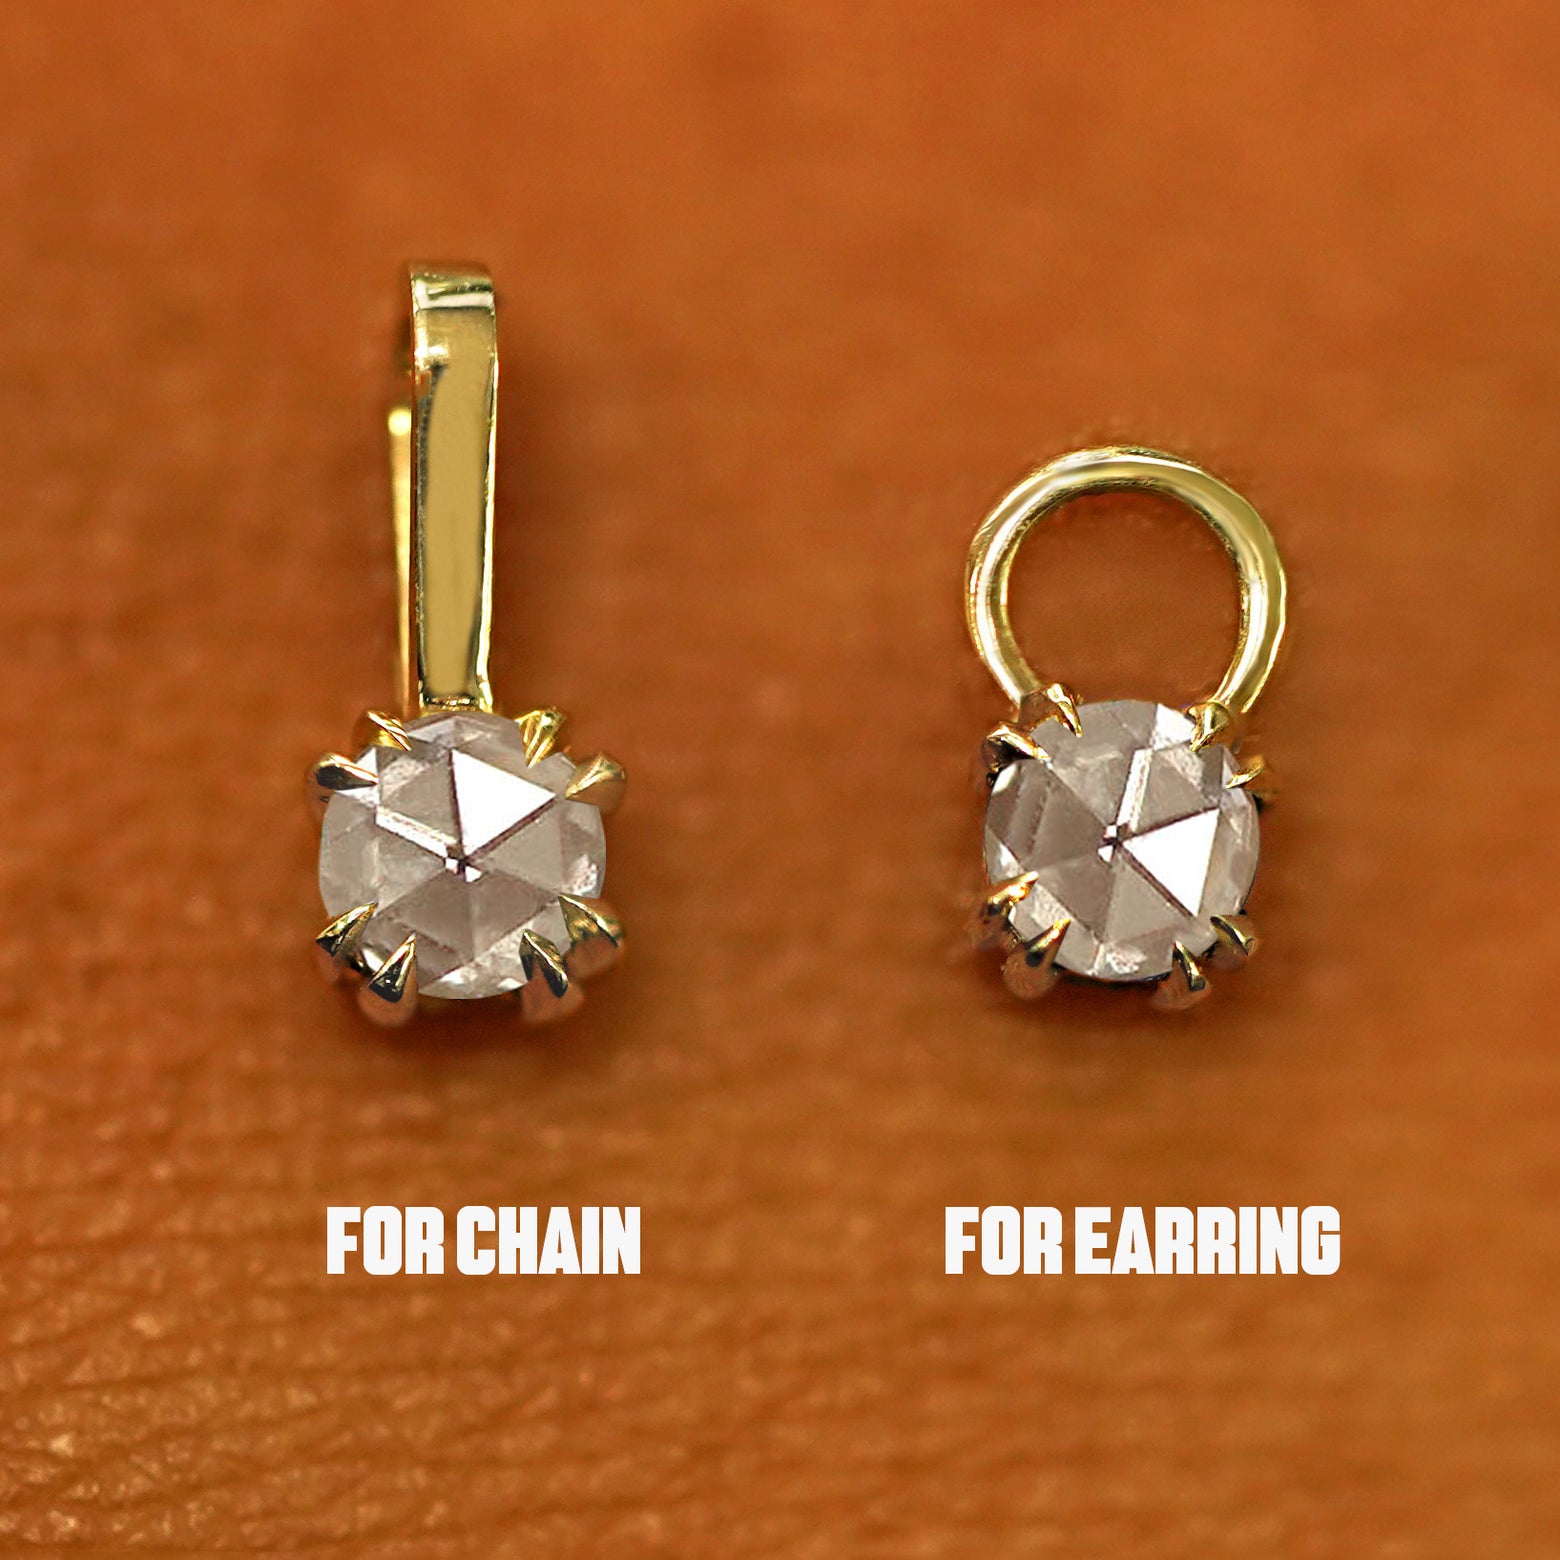 Two 14 karat solid gold Rose Cut Diamond Charms shown in the For Chain and For Earring options